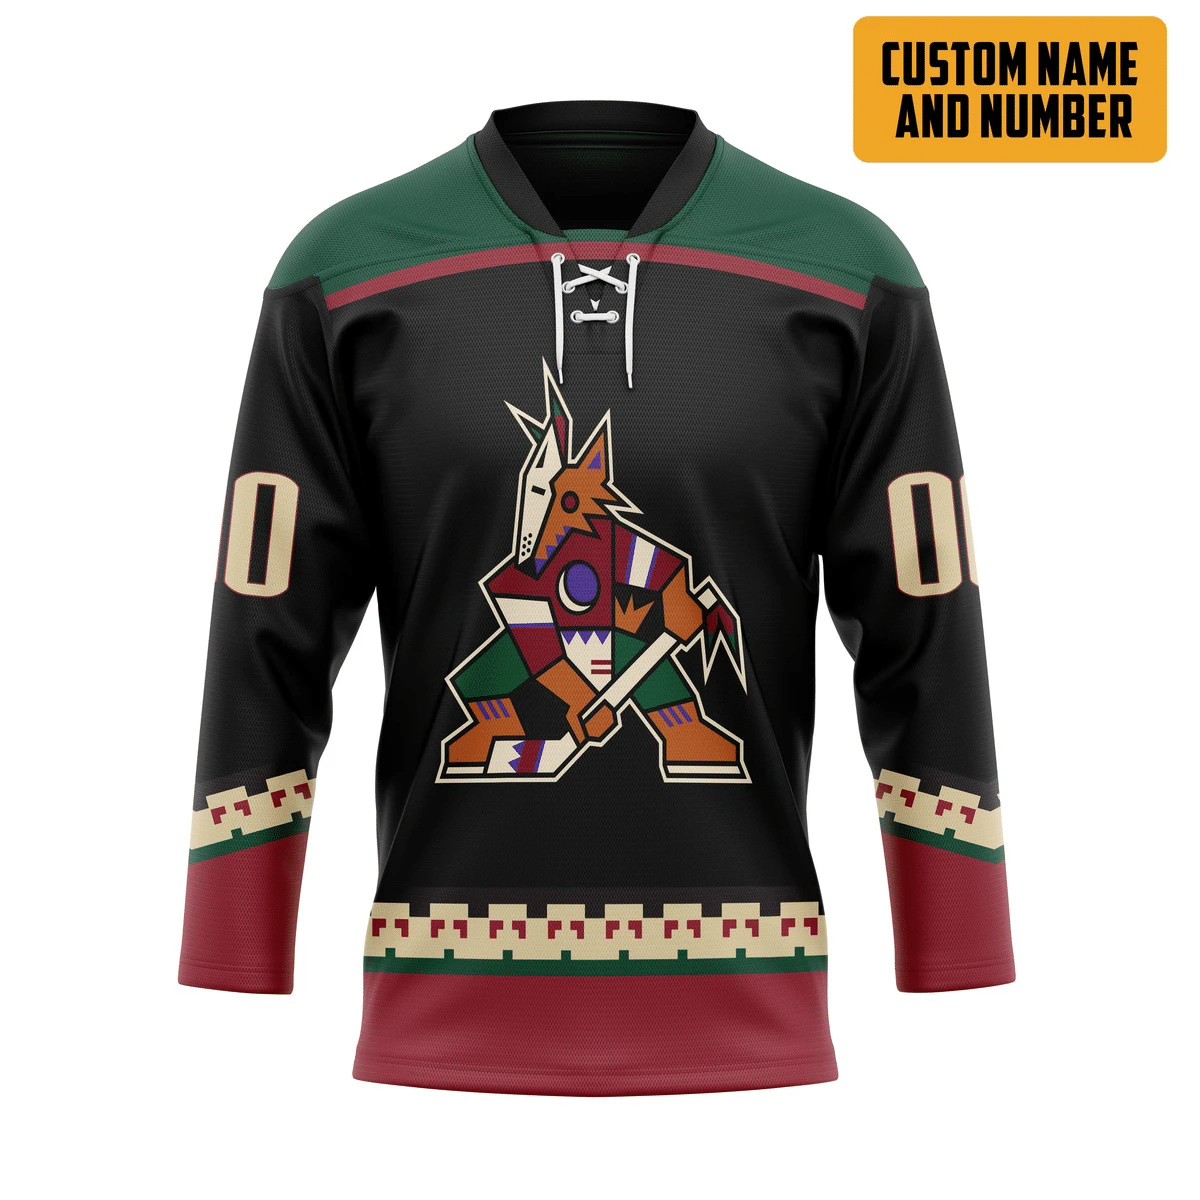 The hockey jersey is one of the most important items to have as a sports fan. 145